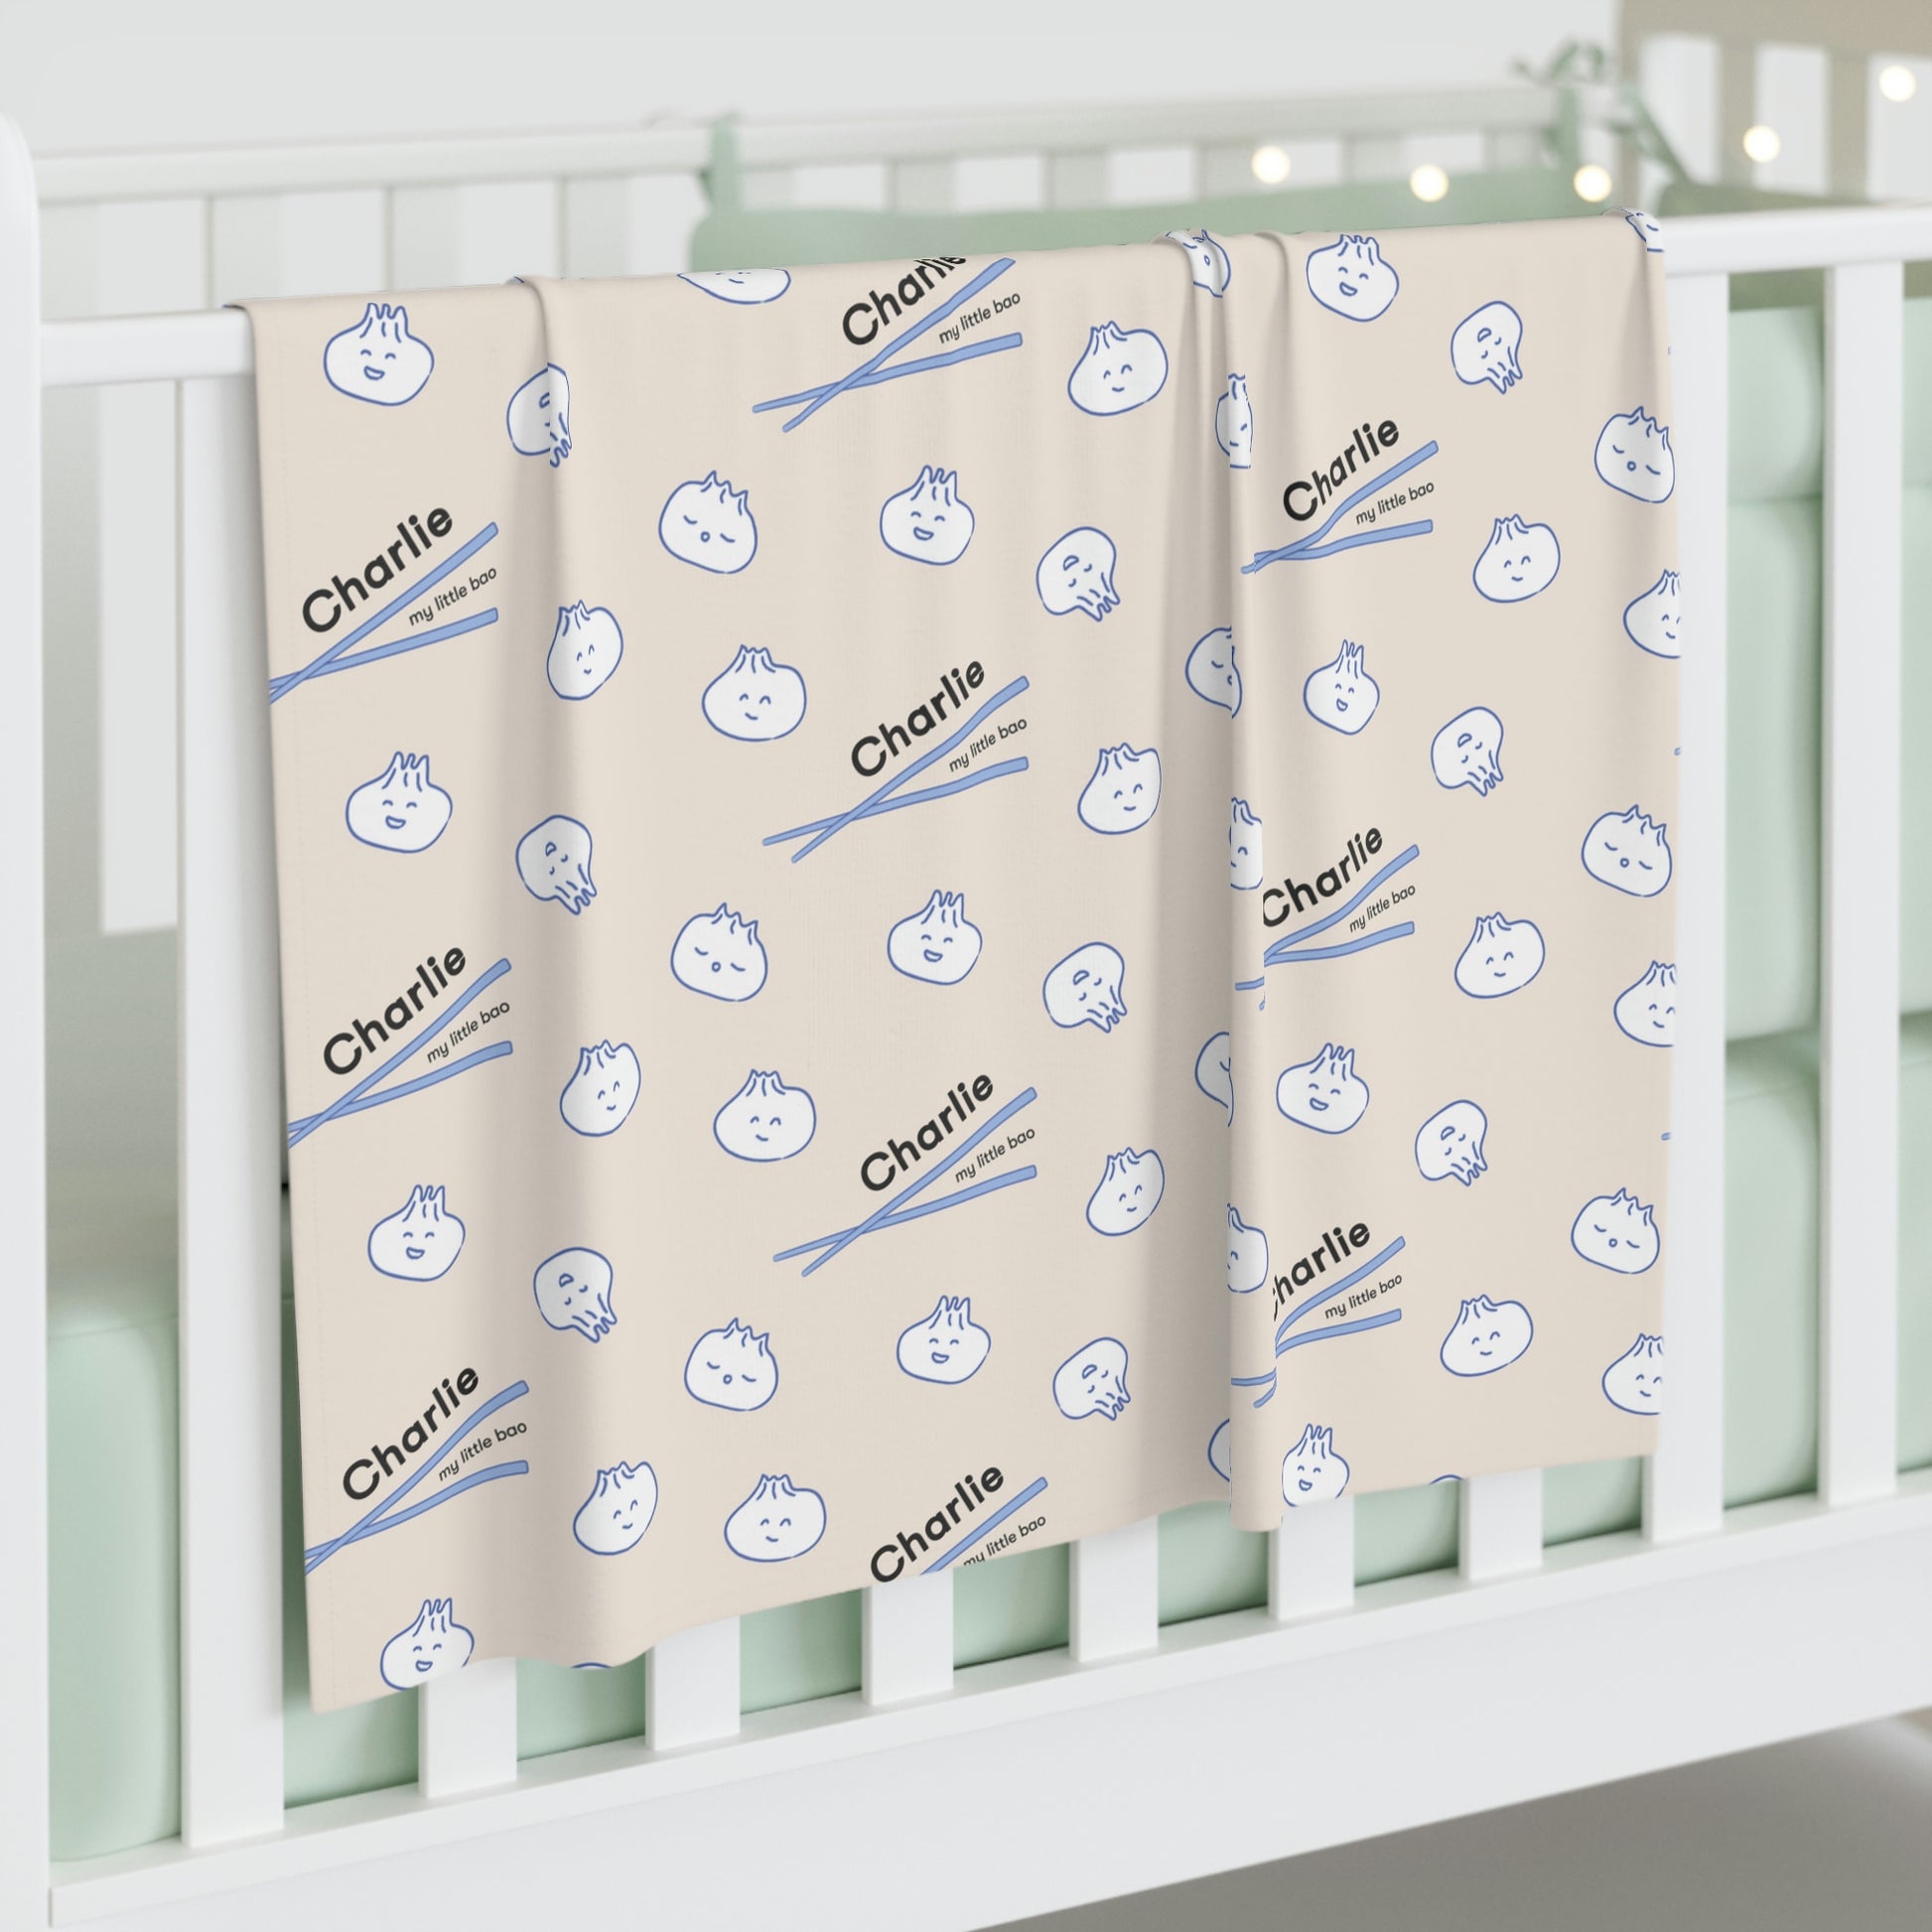 Jersey personalized baby blanket in bao pattern hung over side of white crib